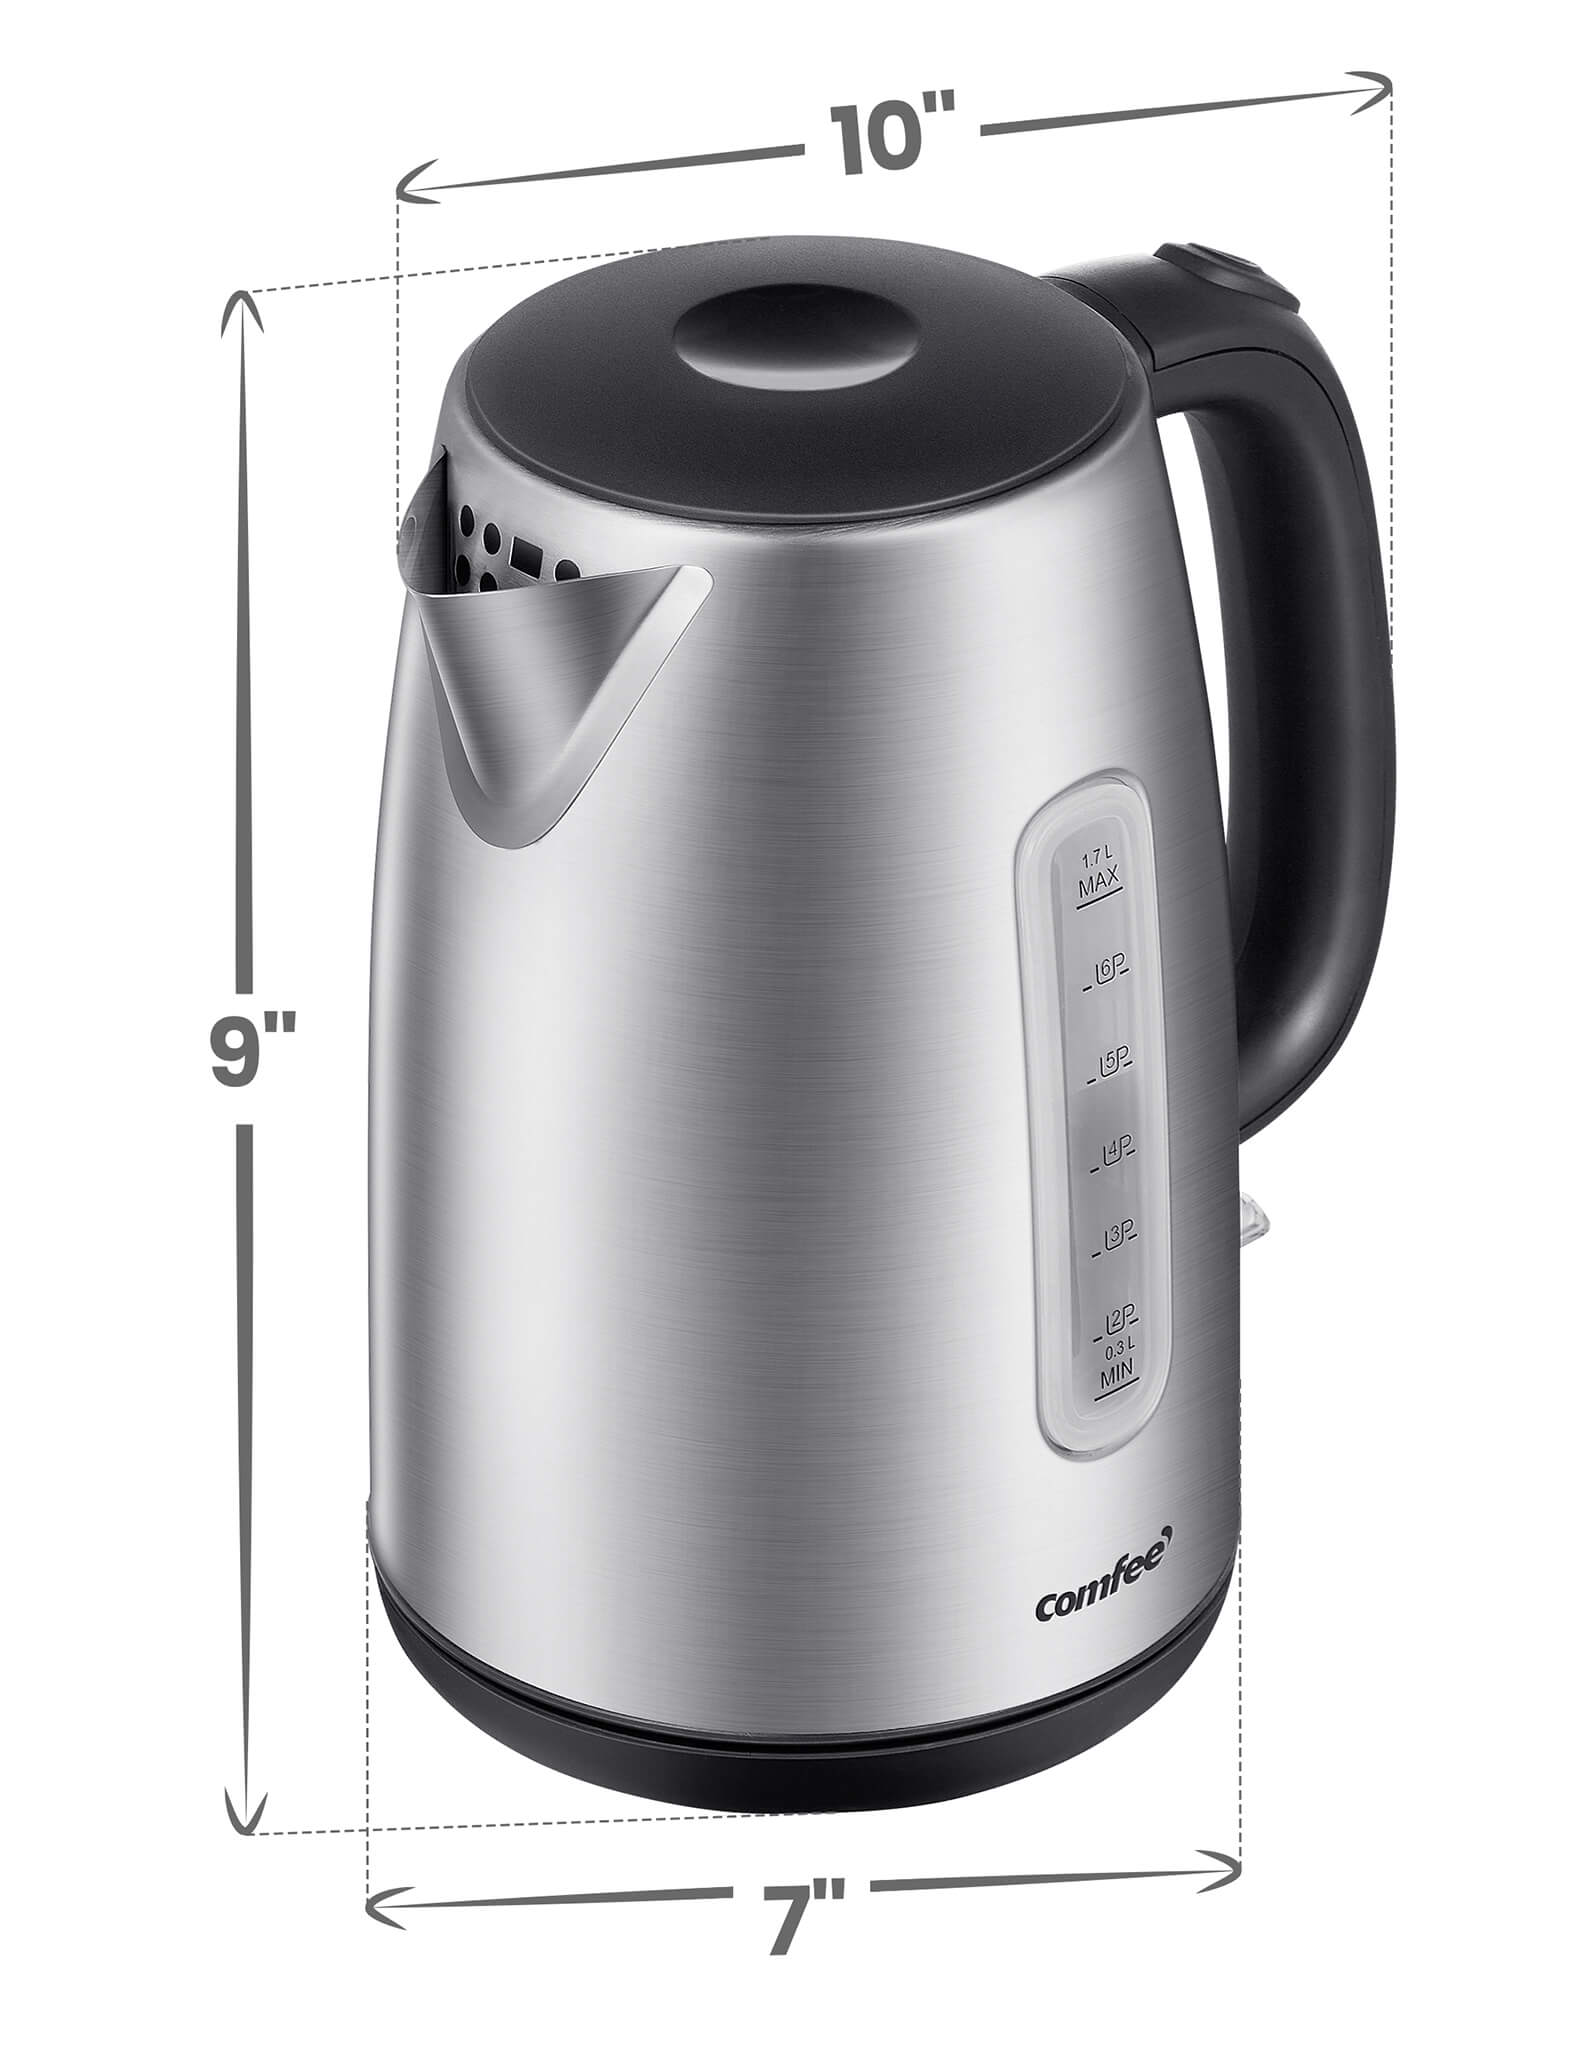 size dimensions of comfee stainless steel electric kettle